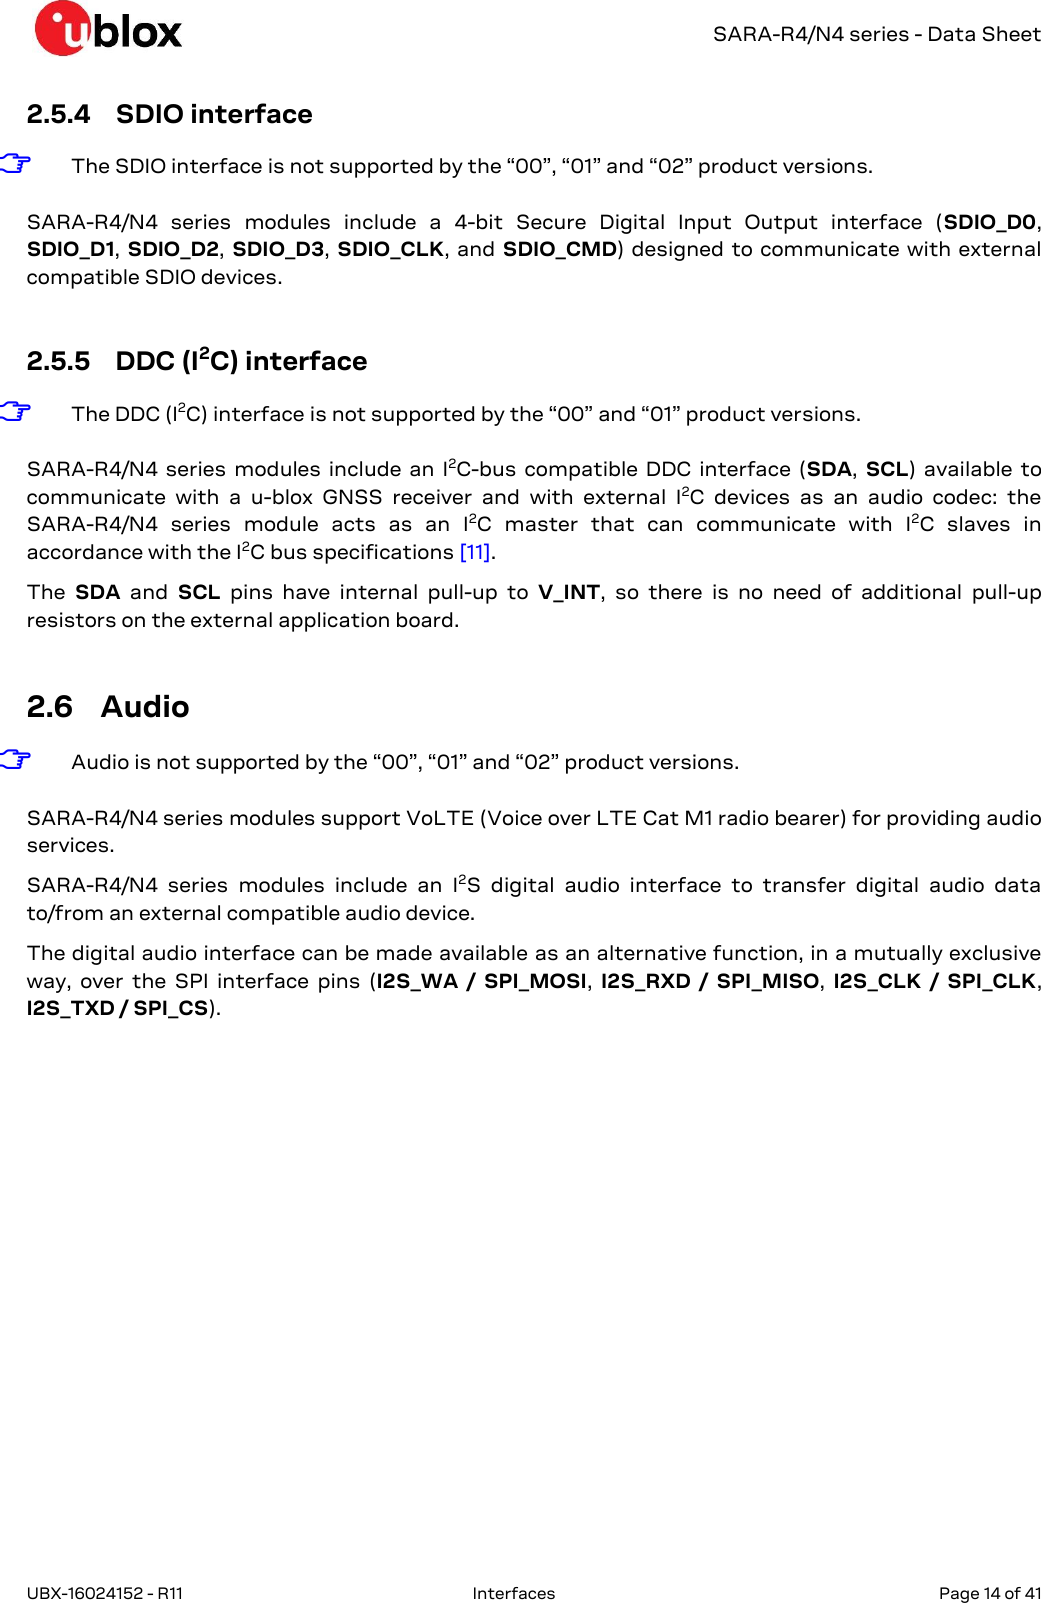   SARA-R4/N4 series - Data Sheet UBX-16024152 - R11  Interfaces   Page 14 of 41      2.5.4 SDIO interface ☞ The SDIO interface is not supported by the “00”, “01” and “02” product versions.  SARA-R4/N4  series  modules  include  a  4-bit  Secure  Digital  Input  Output  interface  (SDIO_D0, SDIO_D1, SDIO_D2, SDIO_D3,  SDIO_CLK,  and  SDIO_CMD) designed  to  communicate with external compatible SDIO devices.  2.5.5 DDC (I2C) interface ☞ The DDC (I2C) interface is not supported by the “00” and “01” product versions.  SARA-R4/N4  series  modules  include an  I2C-bus  compatible  DDC  interface  (SDA,  SCL)  available  to communicate  with  a  u-blox  GNSS  receiver  and  with  external  I2C  devices  as  an  audio  codec:  the SARA-R4/N4  series  module  acts  as  an  I2C  master  that  can  communicate  with  I2C  slaves  in accordance with the I2C bus specifications [11]. The  SDA  and  SCL  pins  have  internal  pull-up  to  V_INT,  so  there  is  no  need  of  additional  pull-up resistors on the external application board.  2.6 Audio ☞ Audio is not supported by the “00”, “01” and “02” product versions.  SARA-R4/N4 series modules support VoLTE (Voice over LTE Cat M1 radio bearer) for providing audio services. SARA-R4/N4  series  modules  include  an  I2S  digital  audio  interface  to  transfer  digital  audio  data to/from an external compatible audio device.  The digital audio interface can be made available as an alternative function, in a mutually exclusive way,  over  the  SPI  interface  pins  (I2S_WA  /  SPI_MOSI,  I2S_RXD  /  SPI_MISO,  I2S_CLK  /  SPI_CLK, I2S_TXD / SPI_CS).  